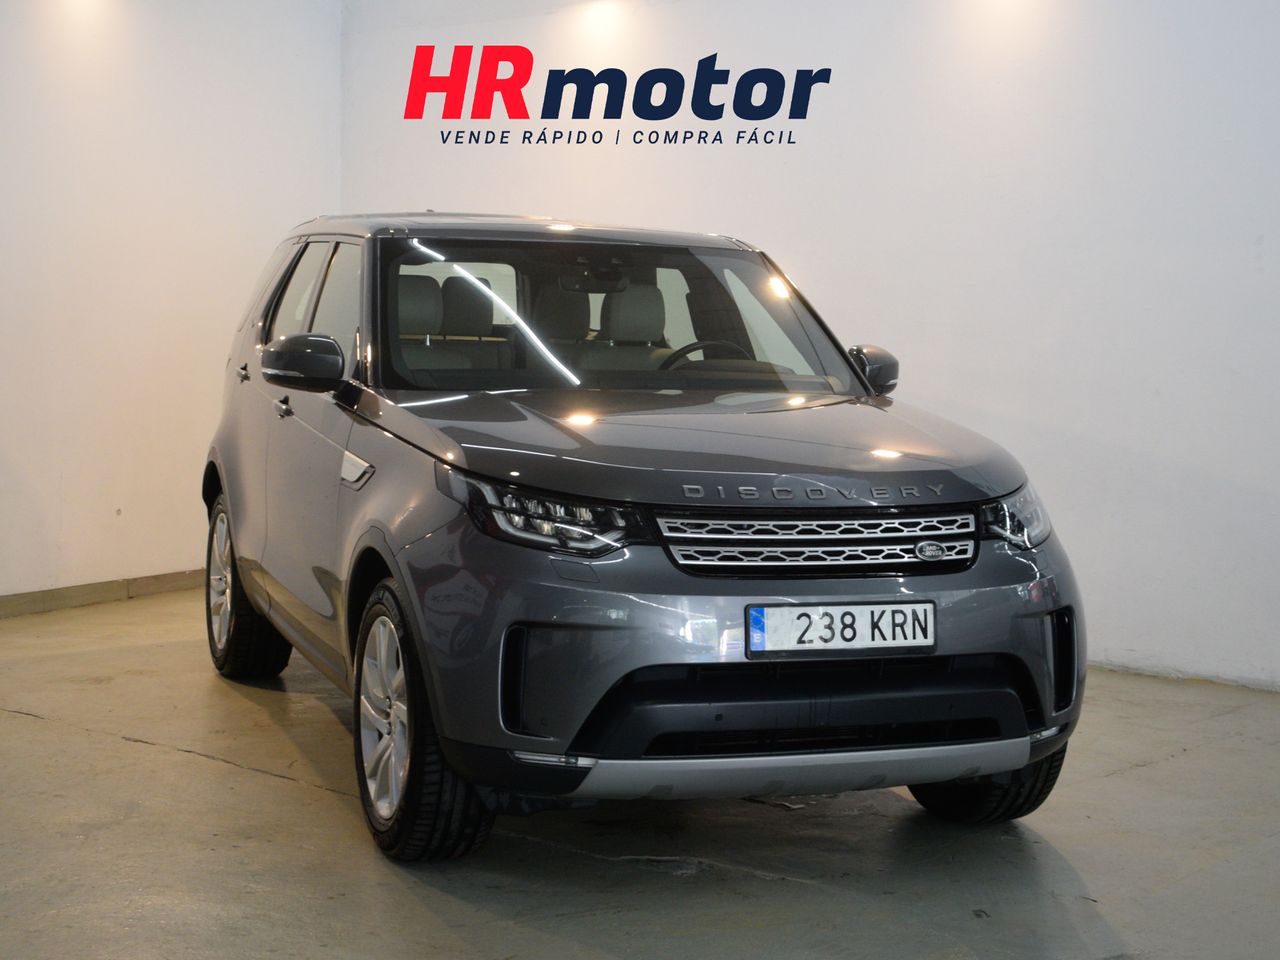 Foto Land-Rover Discovery 1